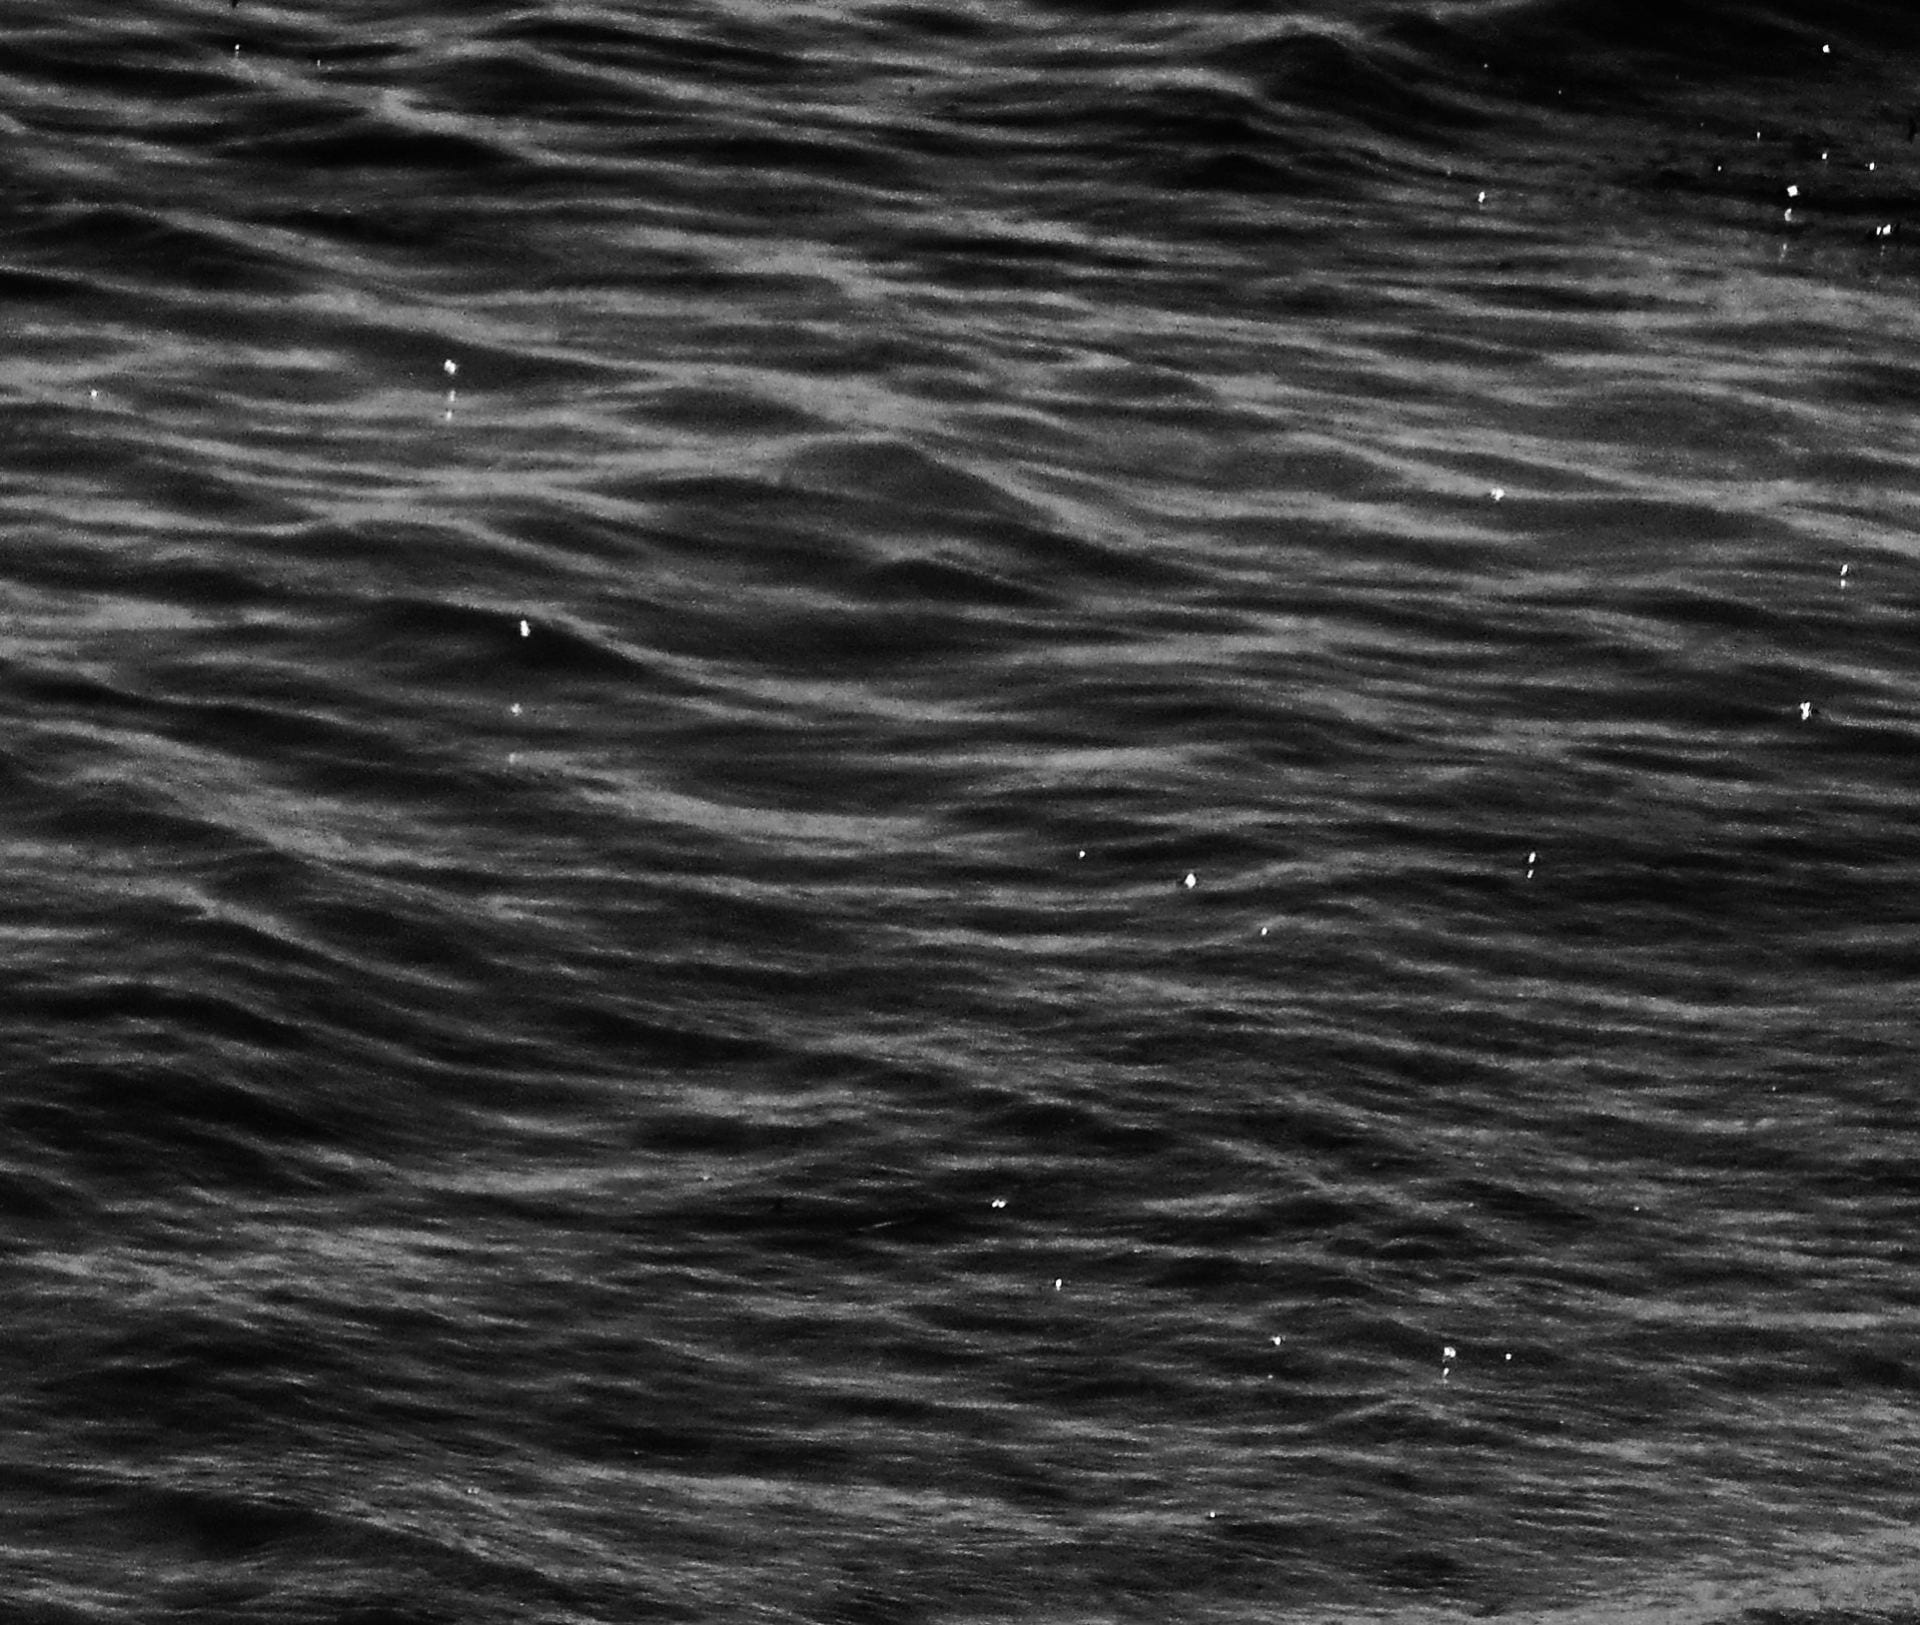 black and white image of the surface of water. it is cropped in close, no waves visible. There are small white dots, specks of light reflecting on the spray of the sea.